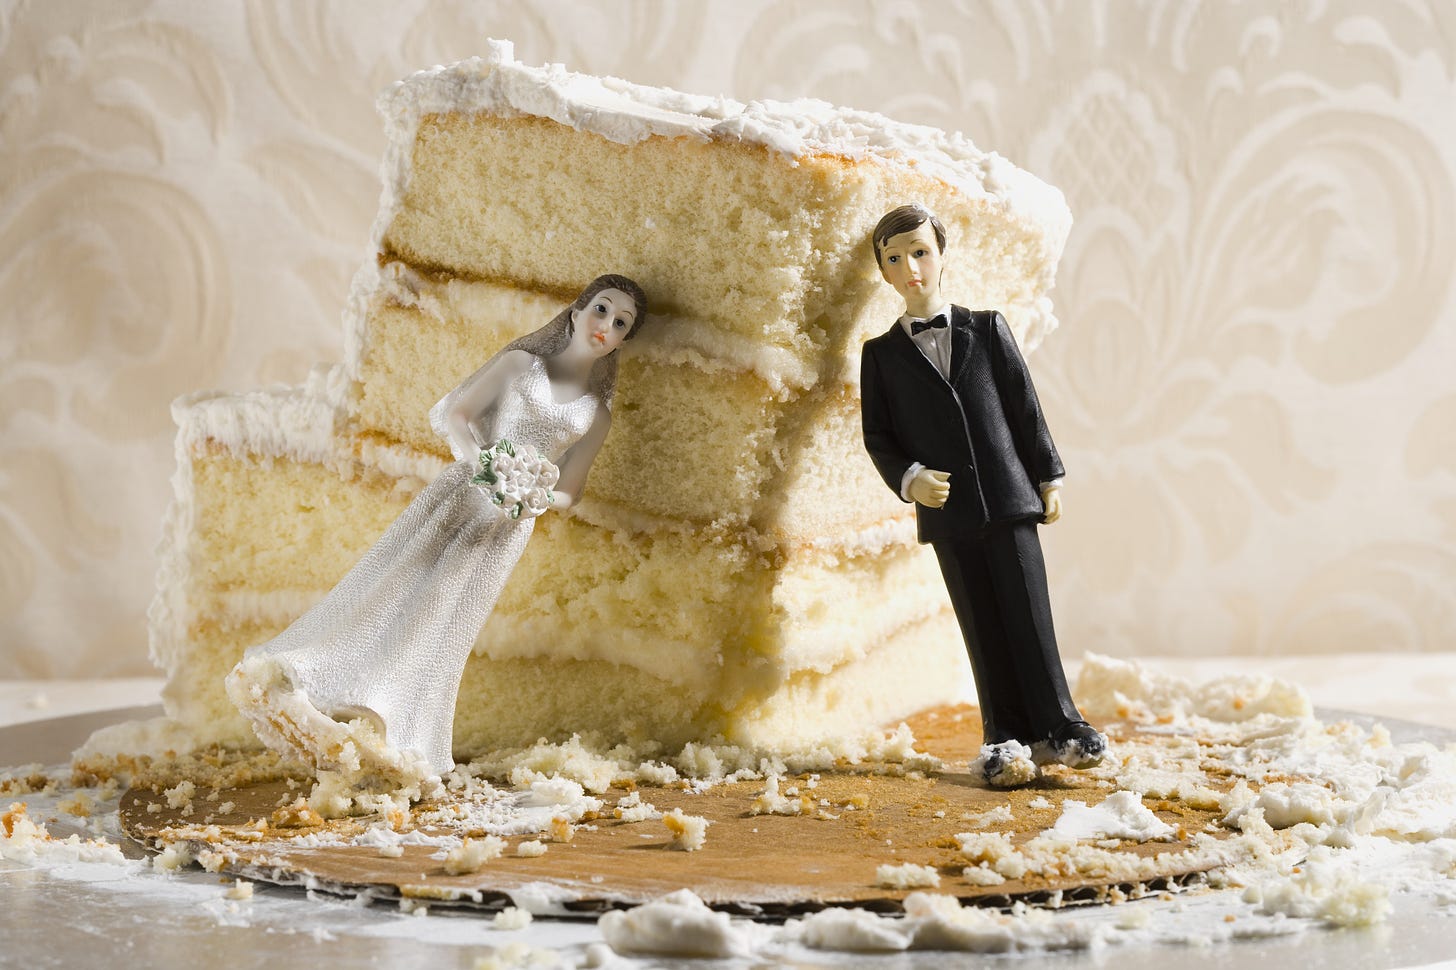 Plastic bride and groom figurines leaning against a slice of wedding cake